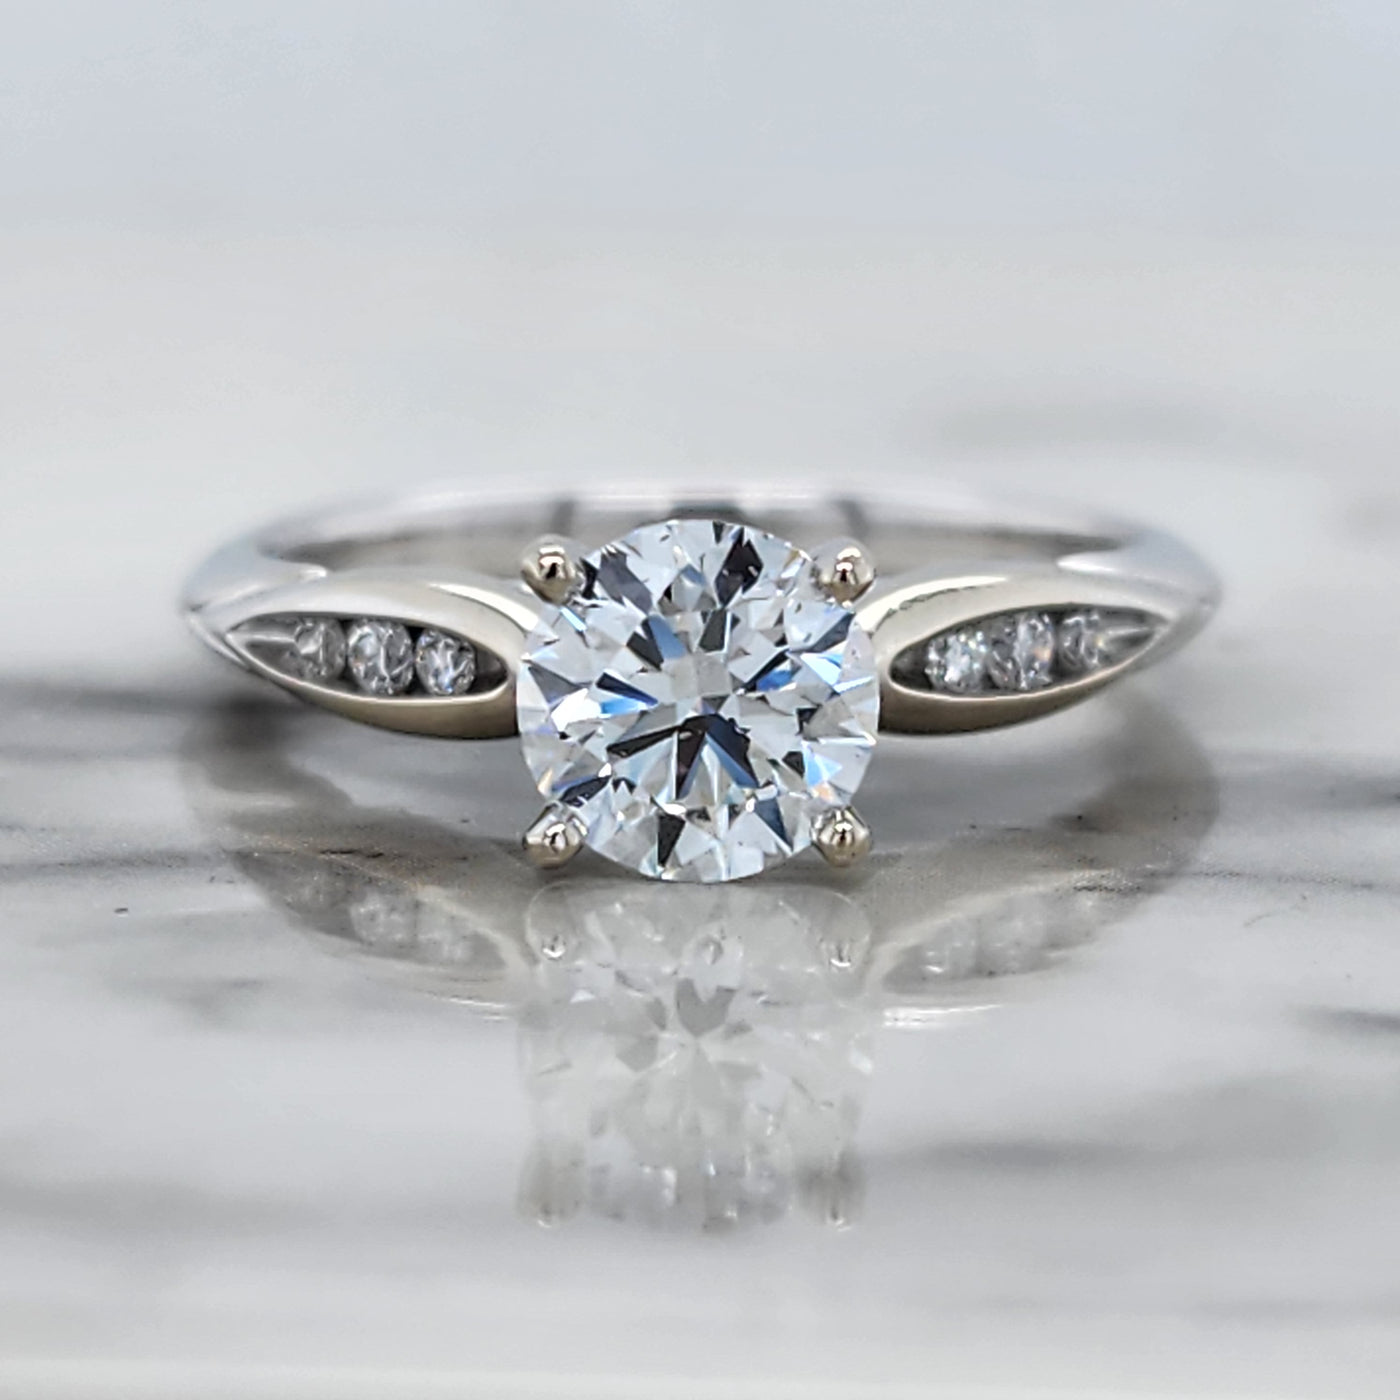 White Gold Engagement Ring With Round Center Stone and Channel Set Accent Stones